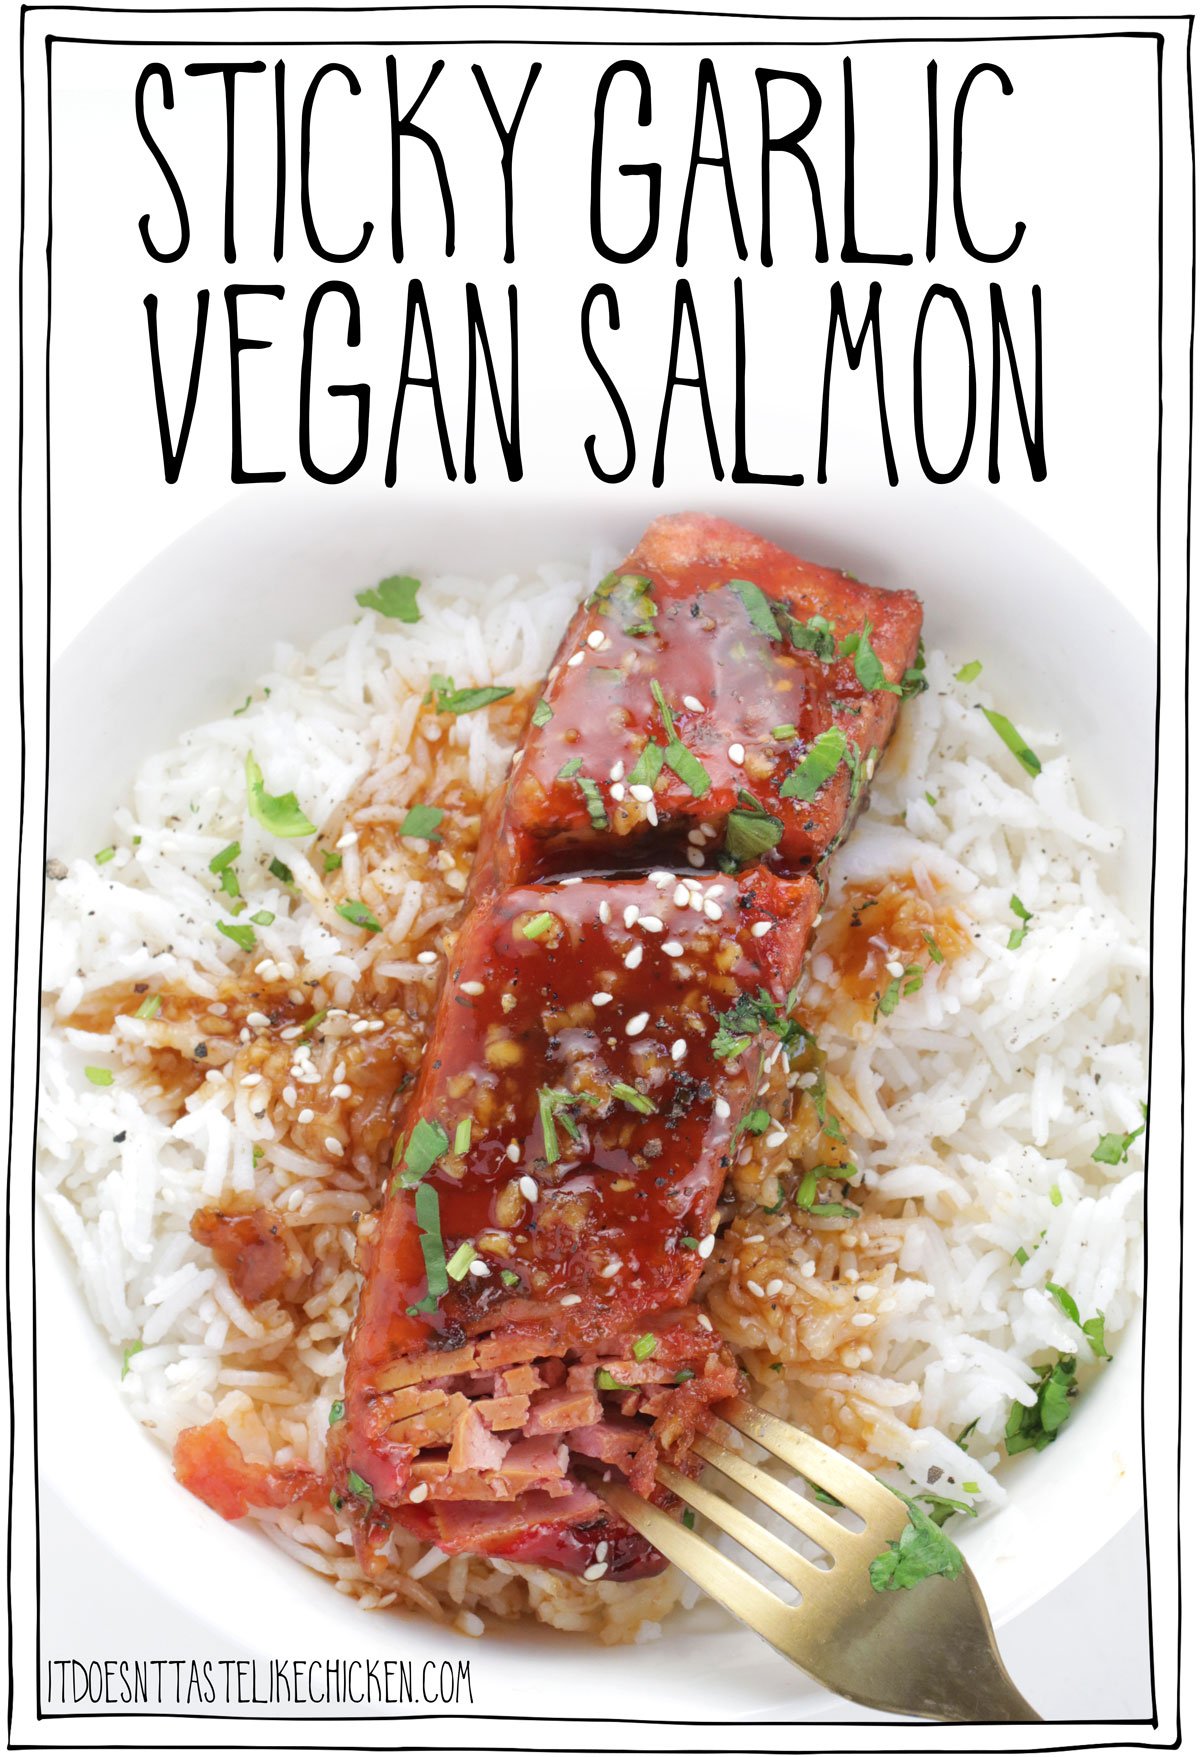 This is vegan seafood at its finest! This tofish (tofu fish) looks like and tastes like salmon. How cool is that!? Sticky garlic vegan salmon is perfect served over a bed of rice or on rice noodles. This looks fancy but this recipe is fairly easy to make as well using ingredients you can find at your local grocery store. #itdoesnttastelikechicken #veganrecipe #veganseafood